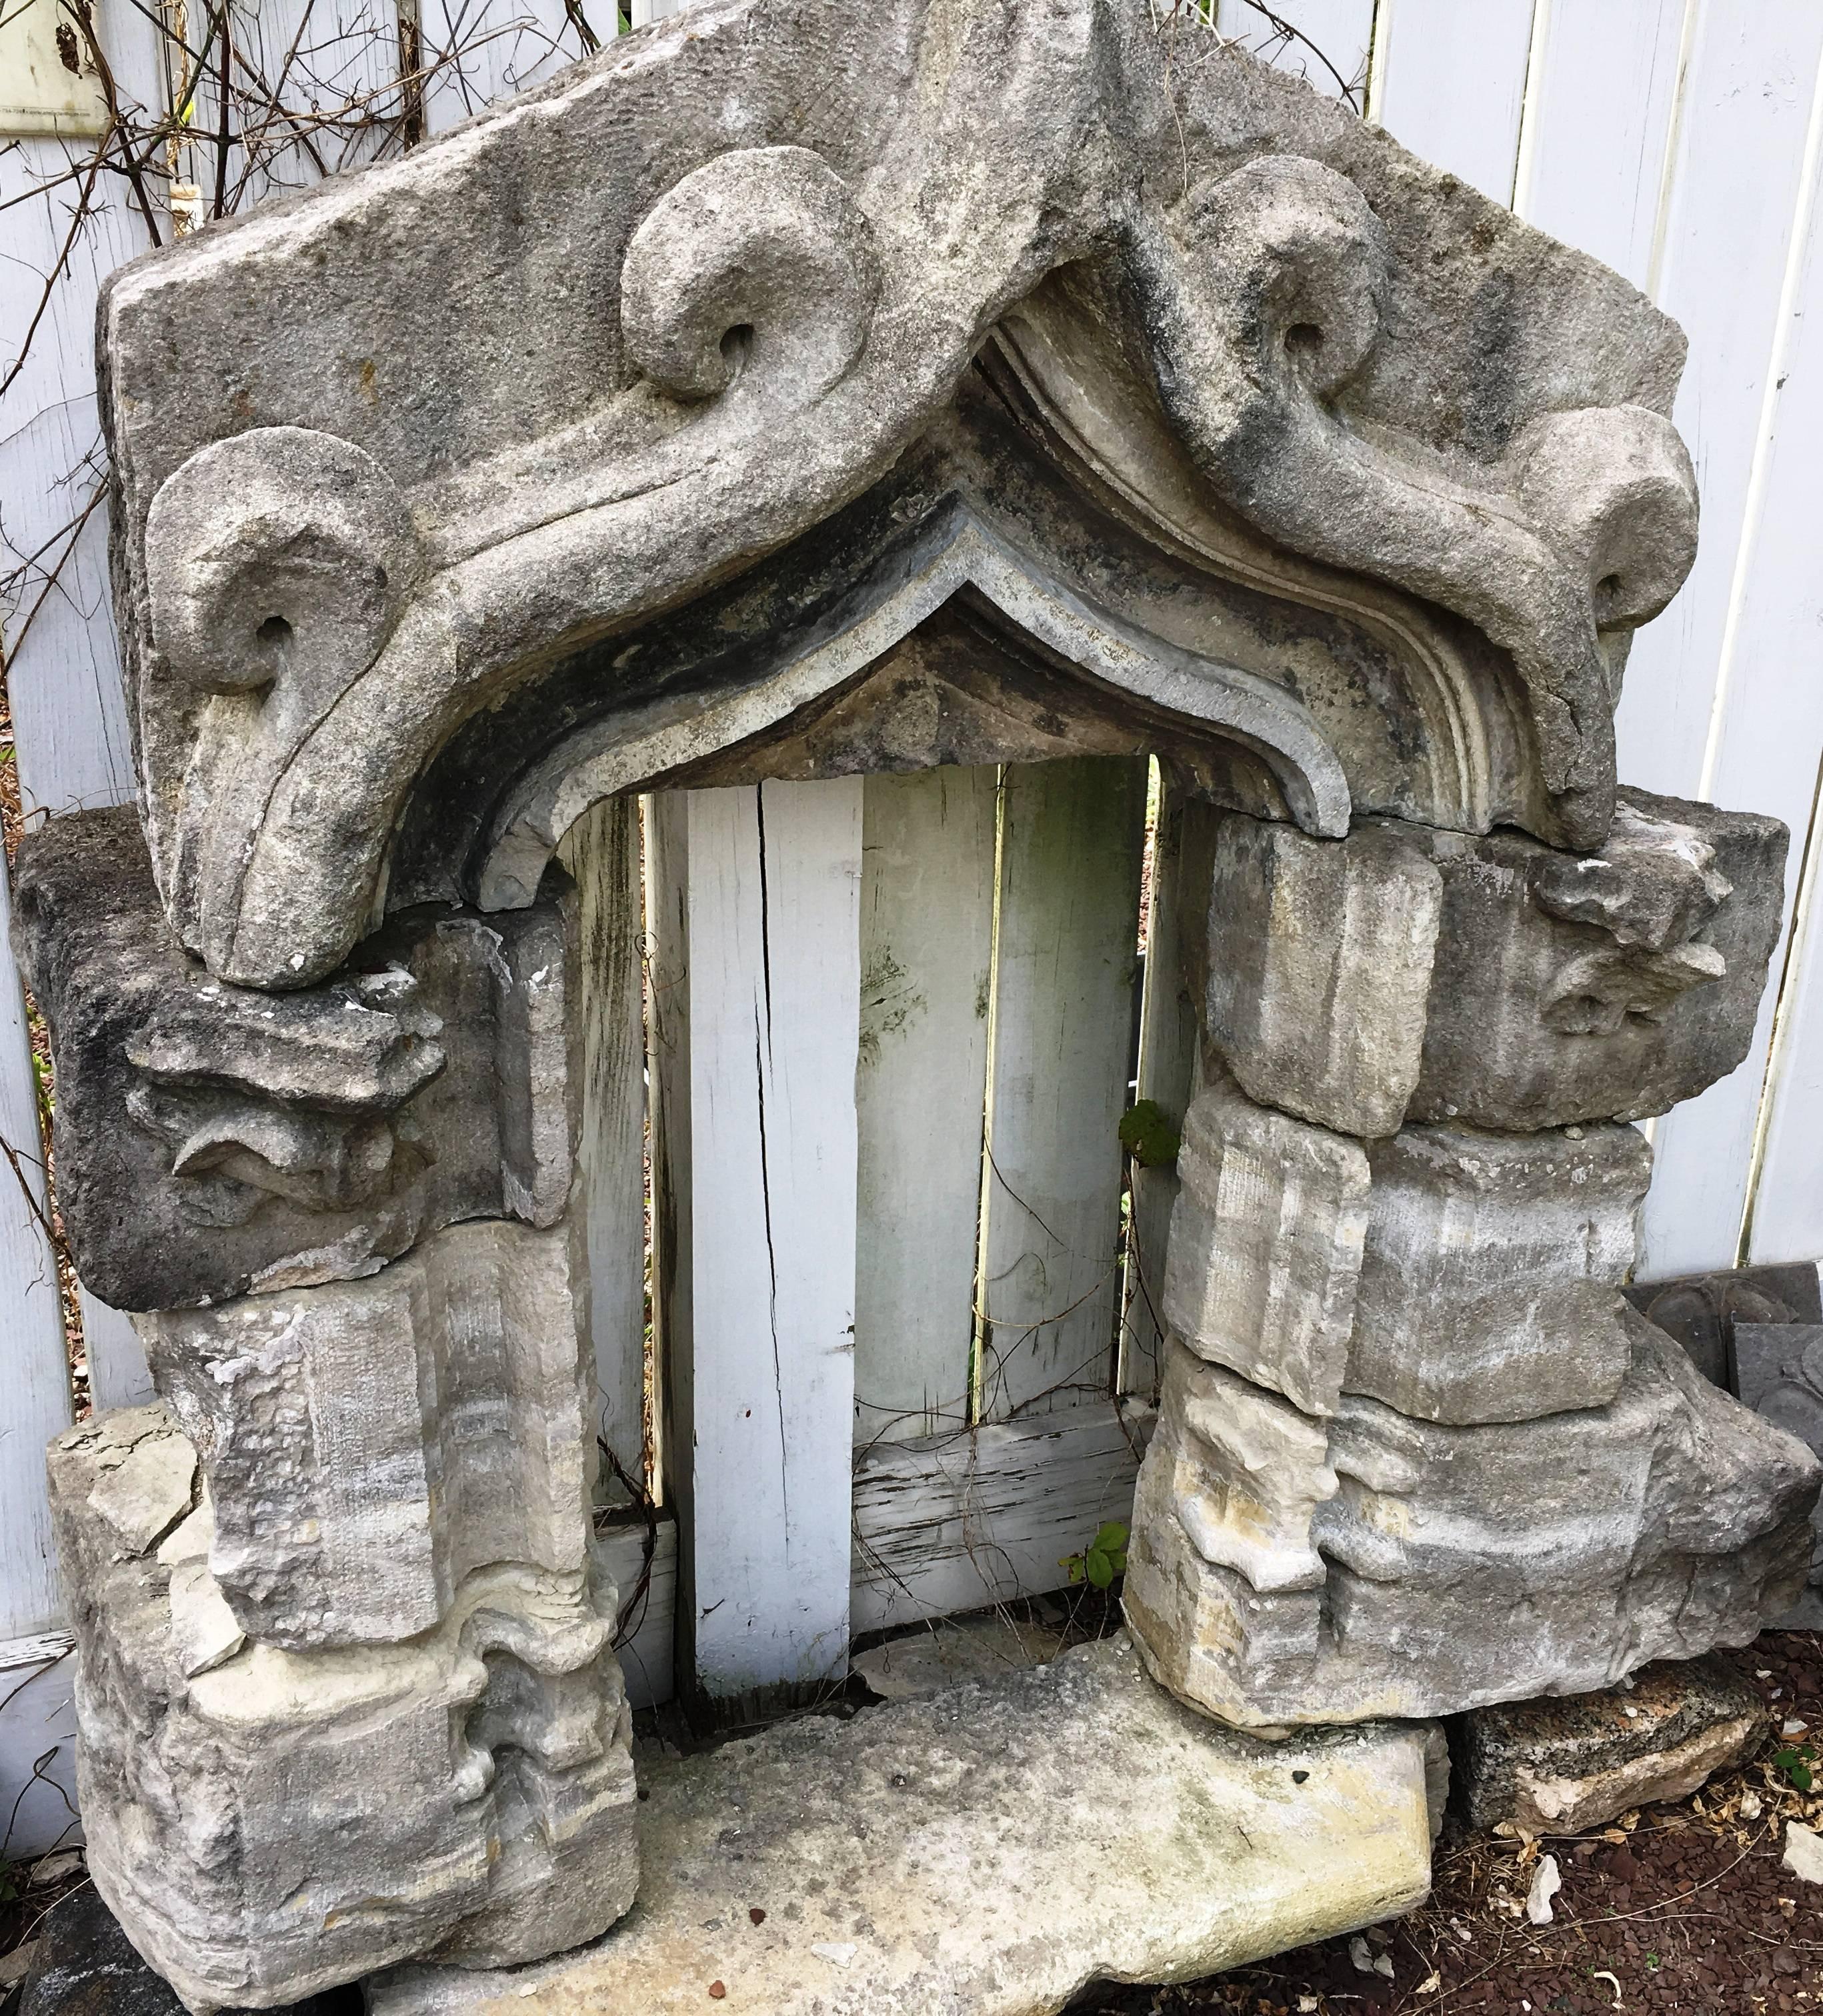 A rare 16th century French architectural window from a chateau carved in limestone, in eight pieces. Perfect as a garden decoration or fountain feature.